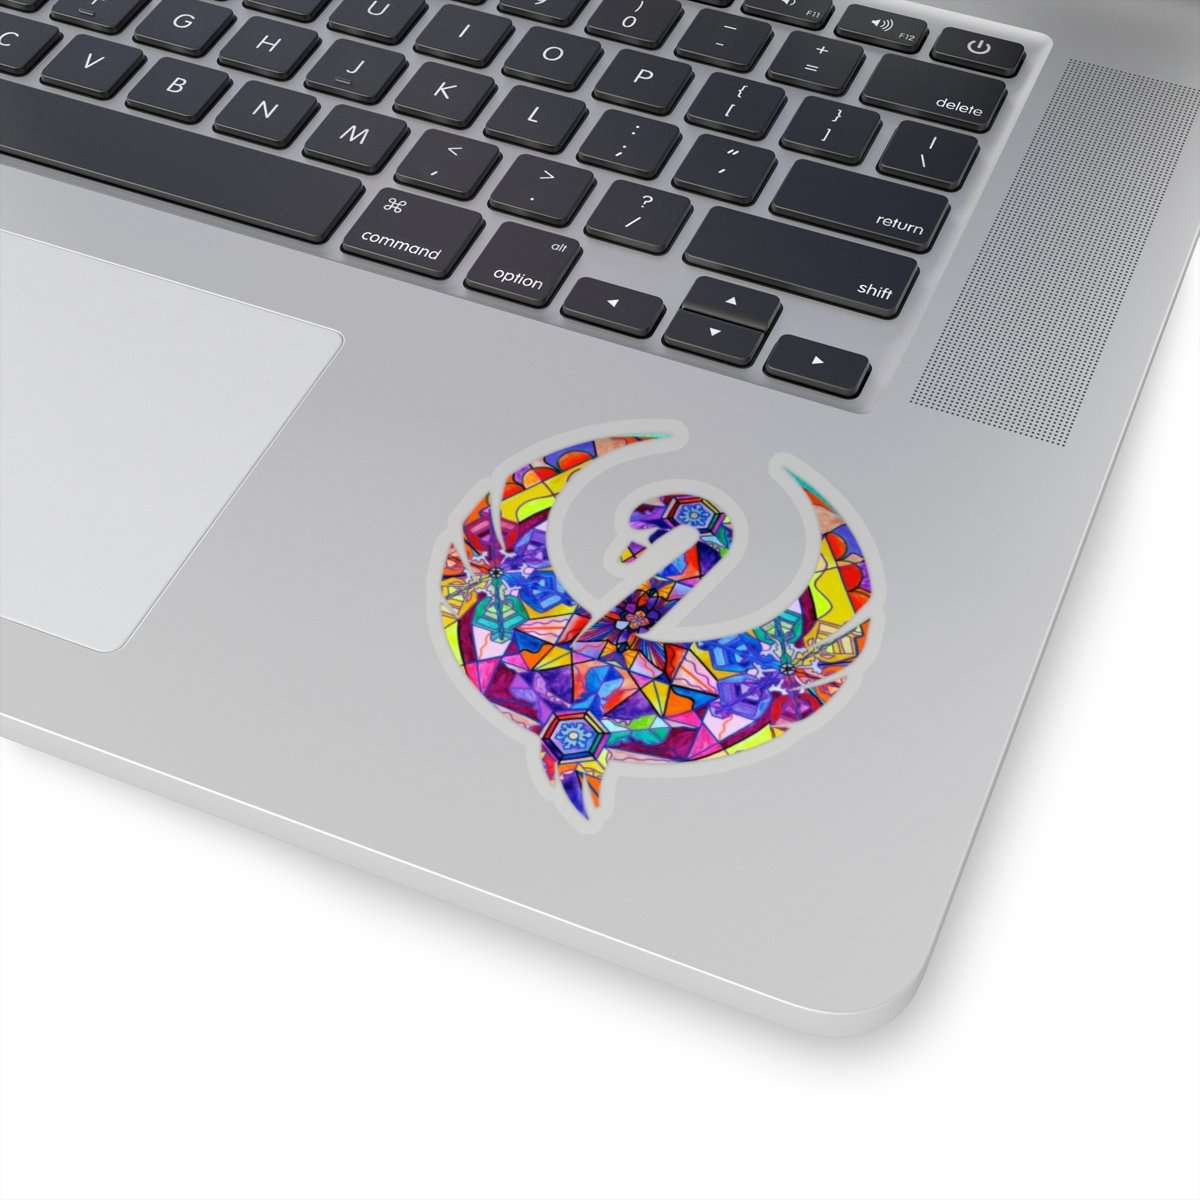 Synchronicity - Swan Stickers